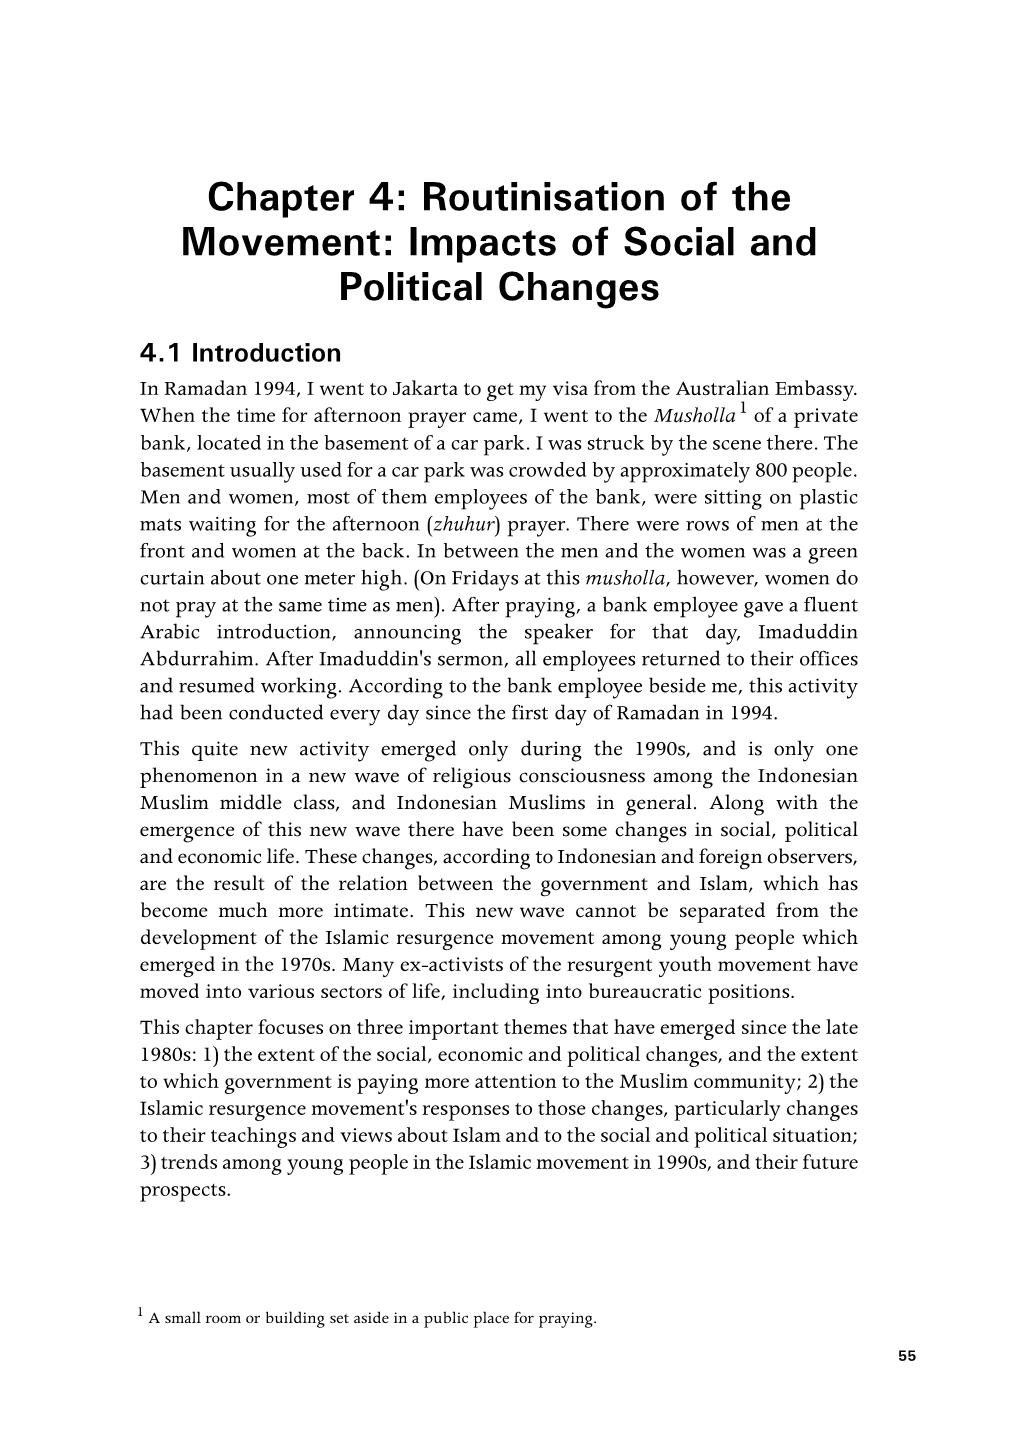 Routinisation of the Movement: Impacts of Social and Political Changes